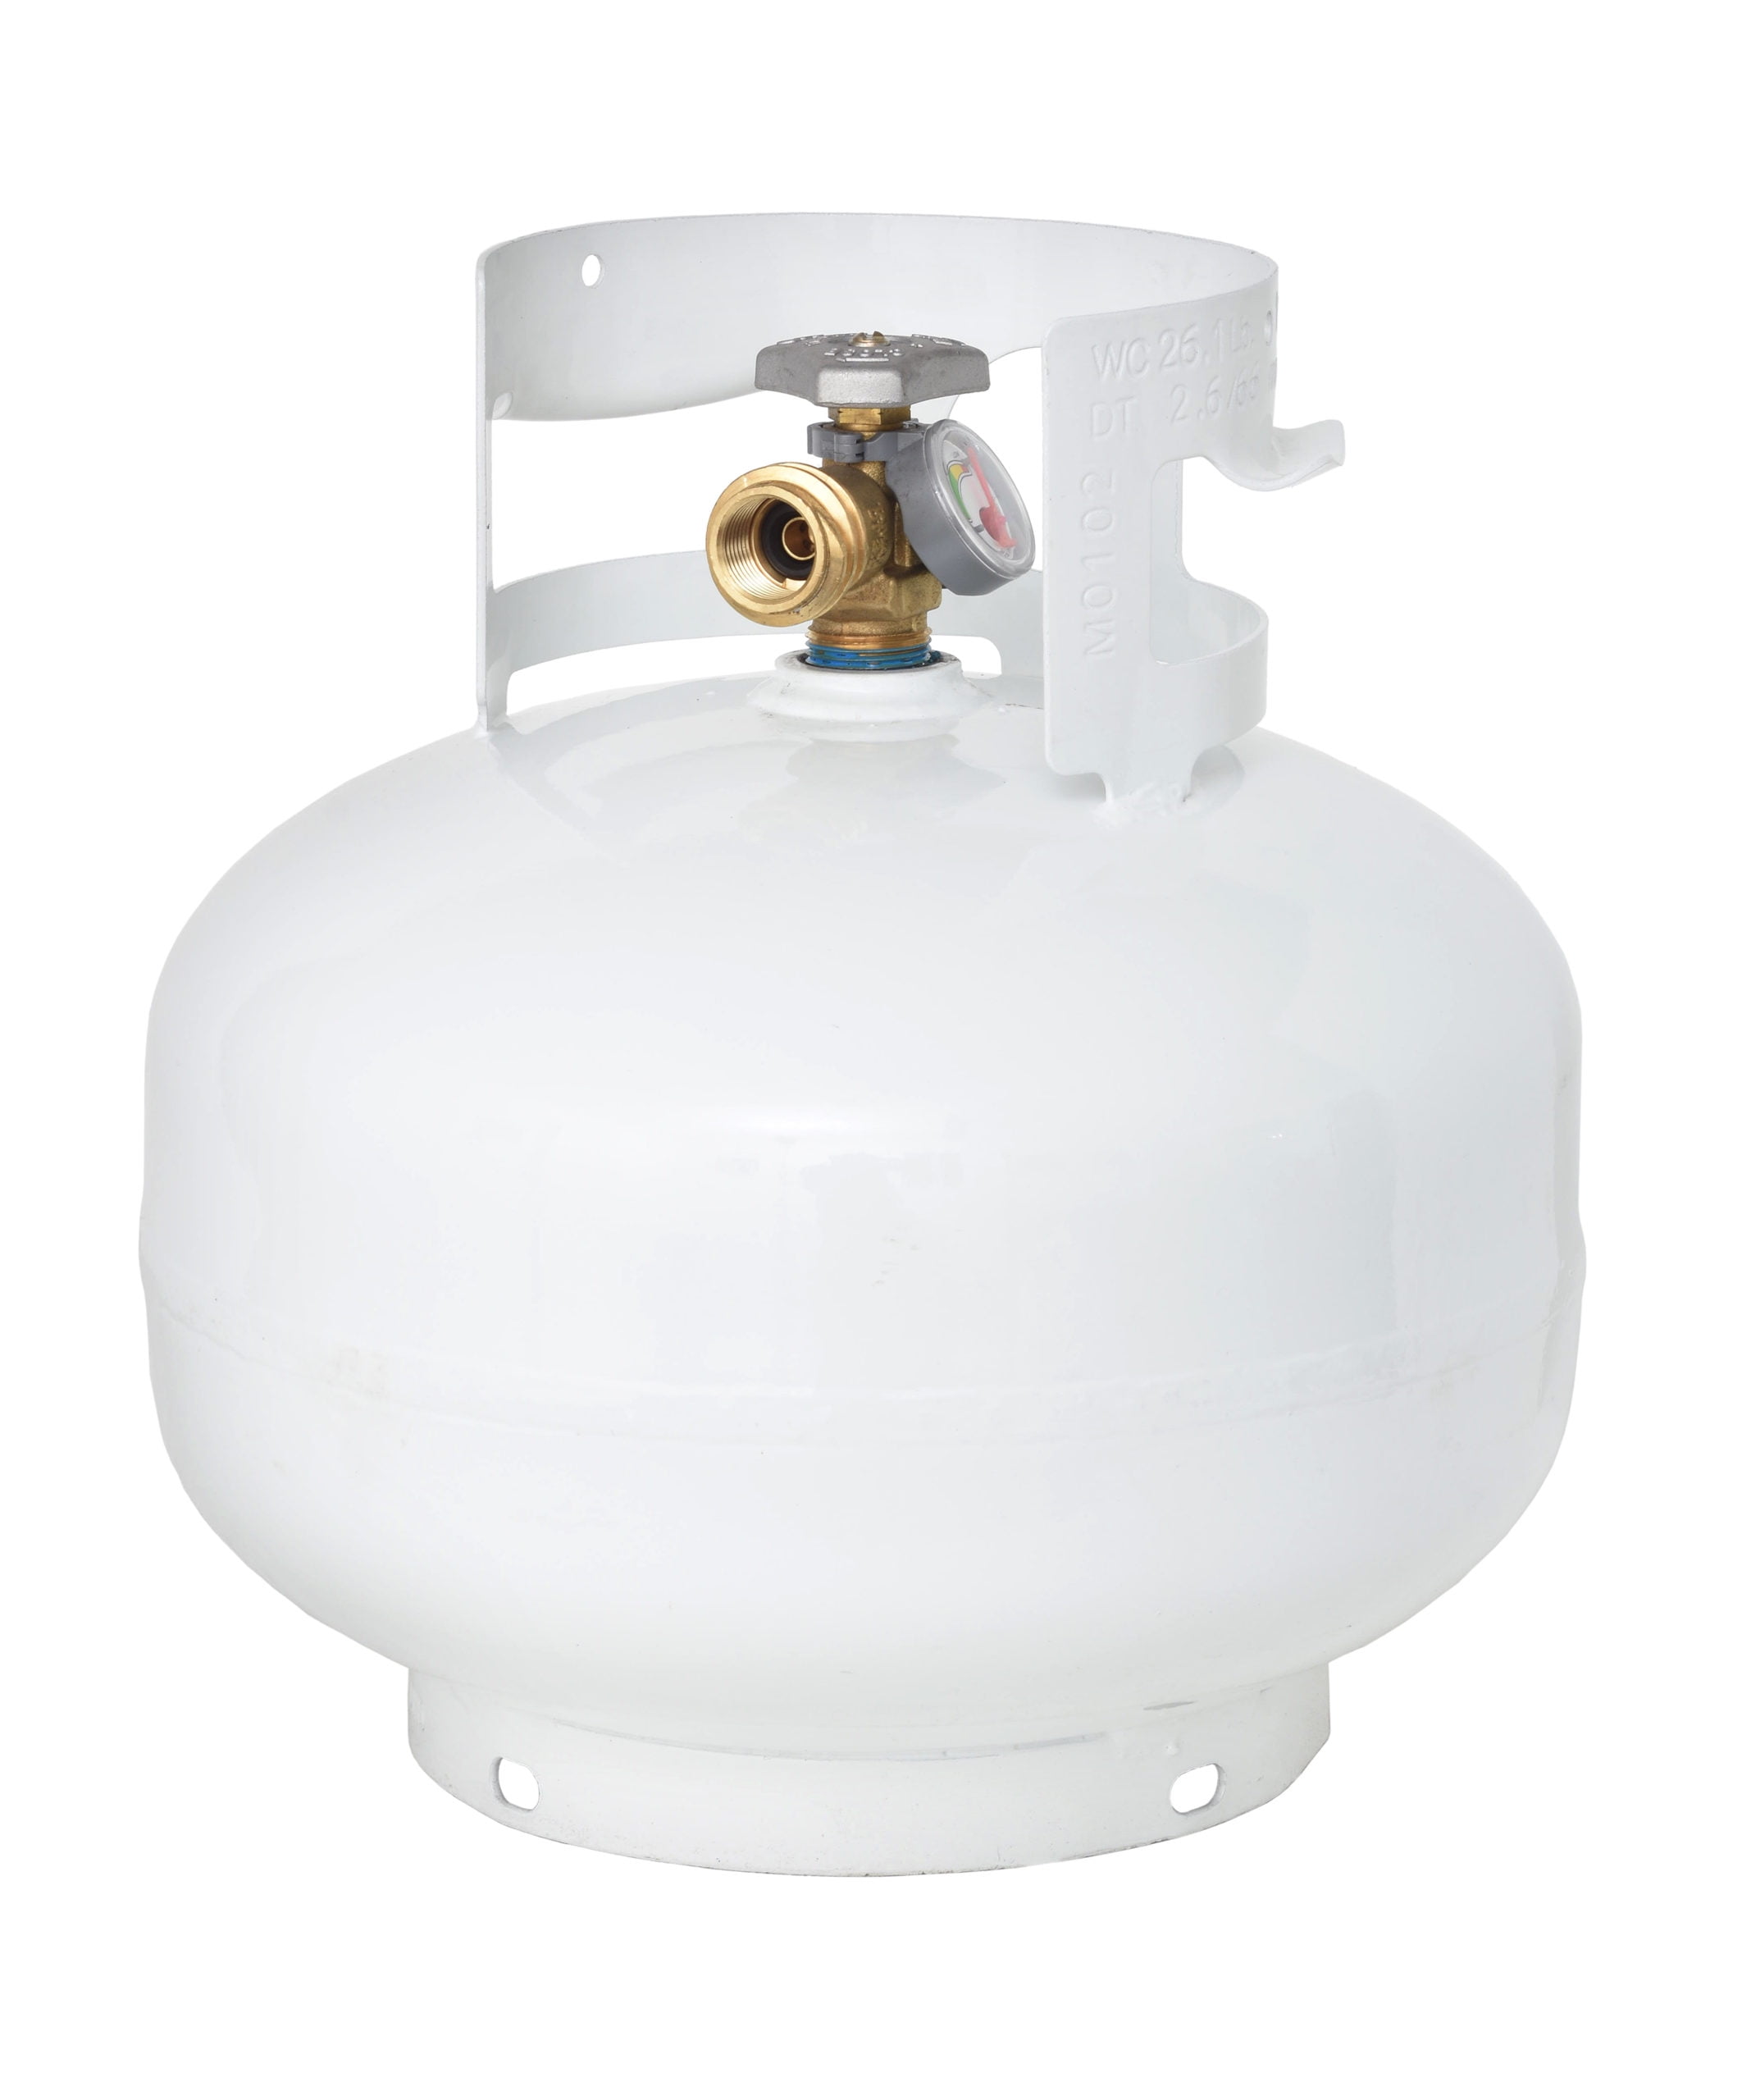 NEW 11 LB Pound Steel Propane Tank Refillable Cylinder with OPD Valve 